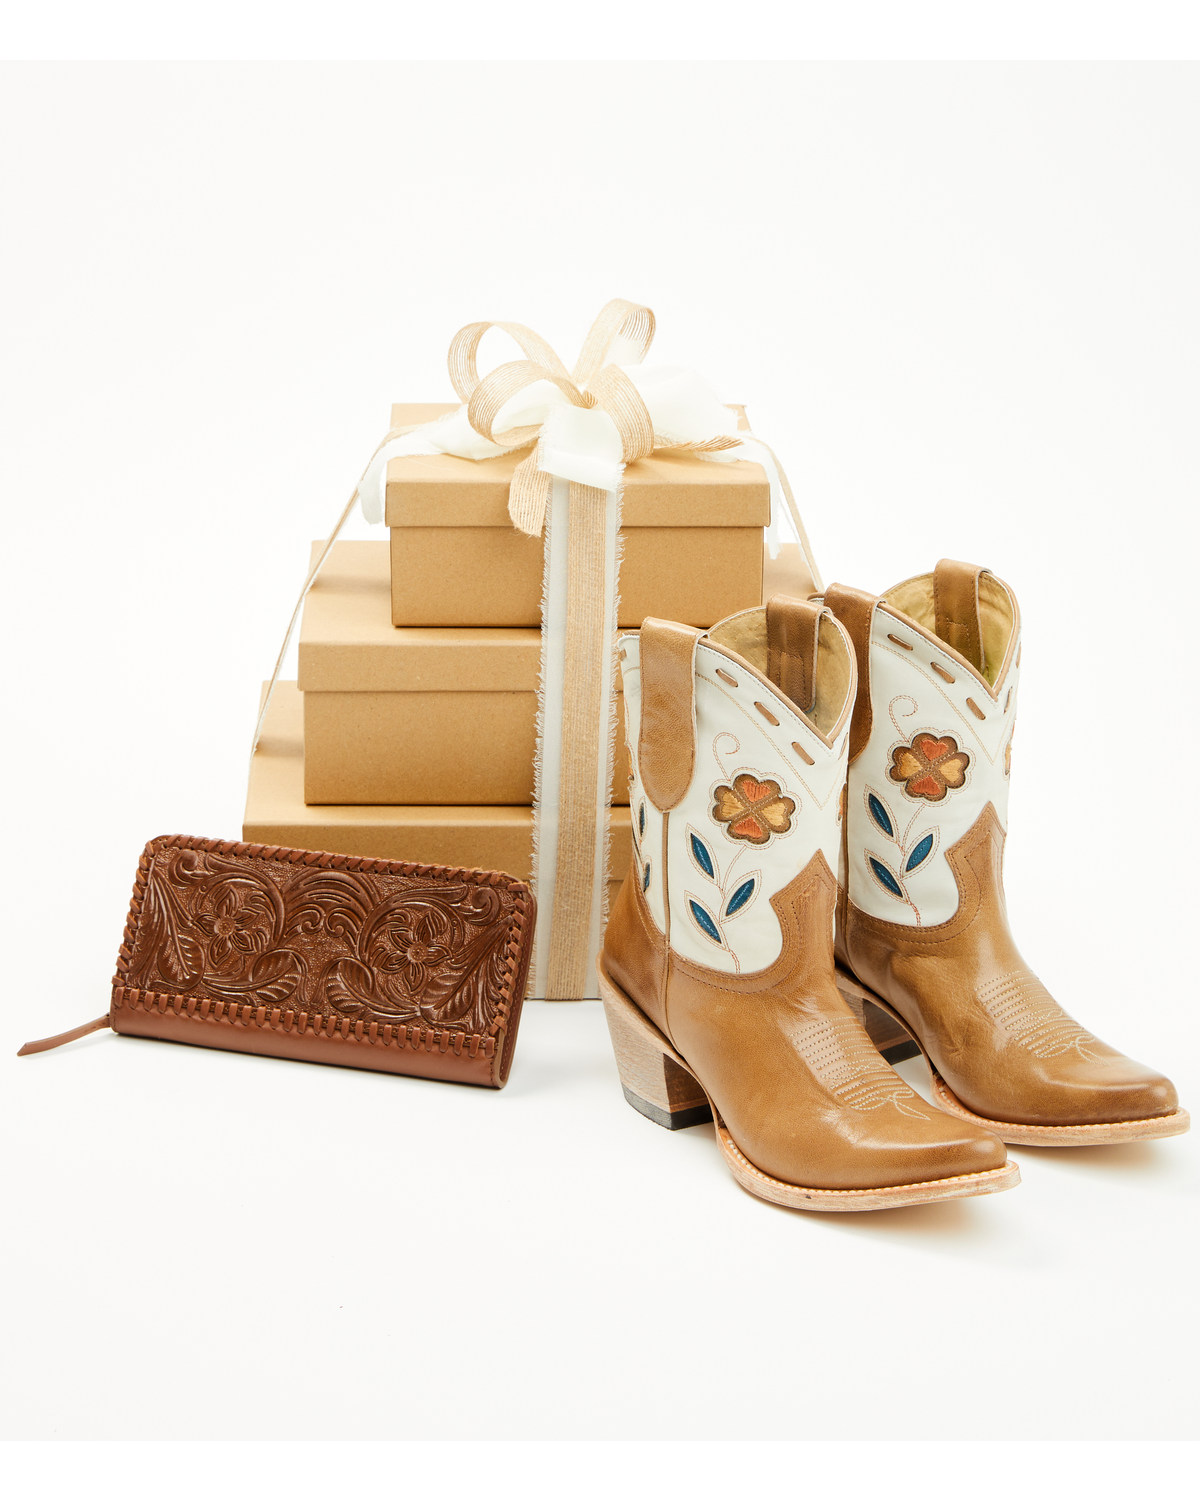 Boot Barn Women's Western Revival Gift Box - Silver Package